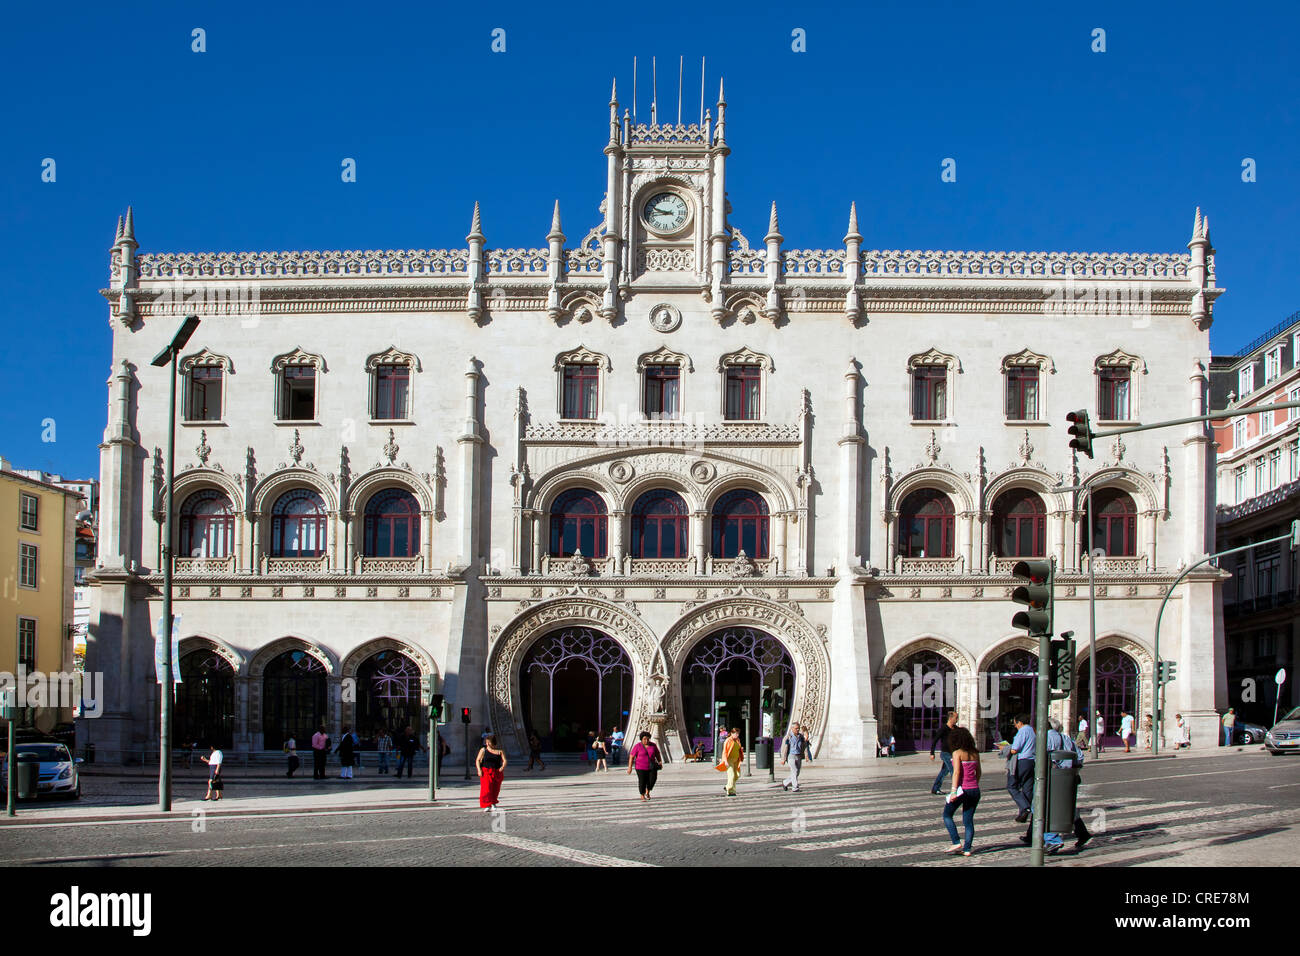 Rossio Railway Station, Estacao do Rossio, with horseshoe-shaped entrances, on Praca de Dom Pedro IV square, in the district of Stock Photo